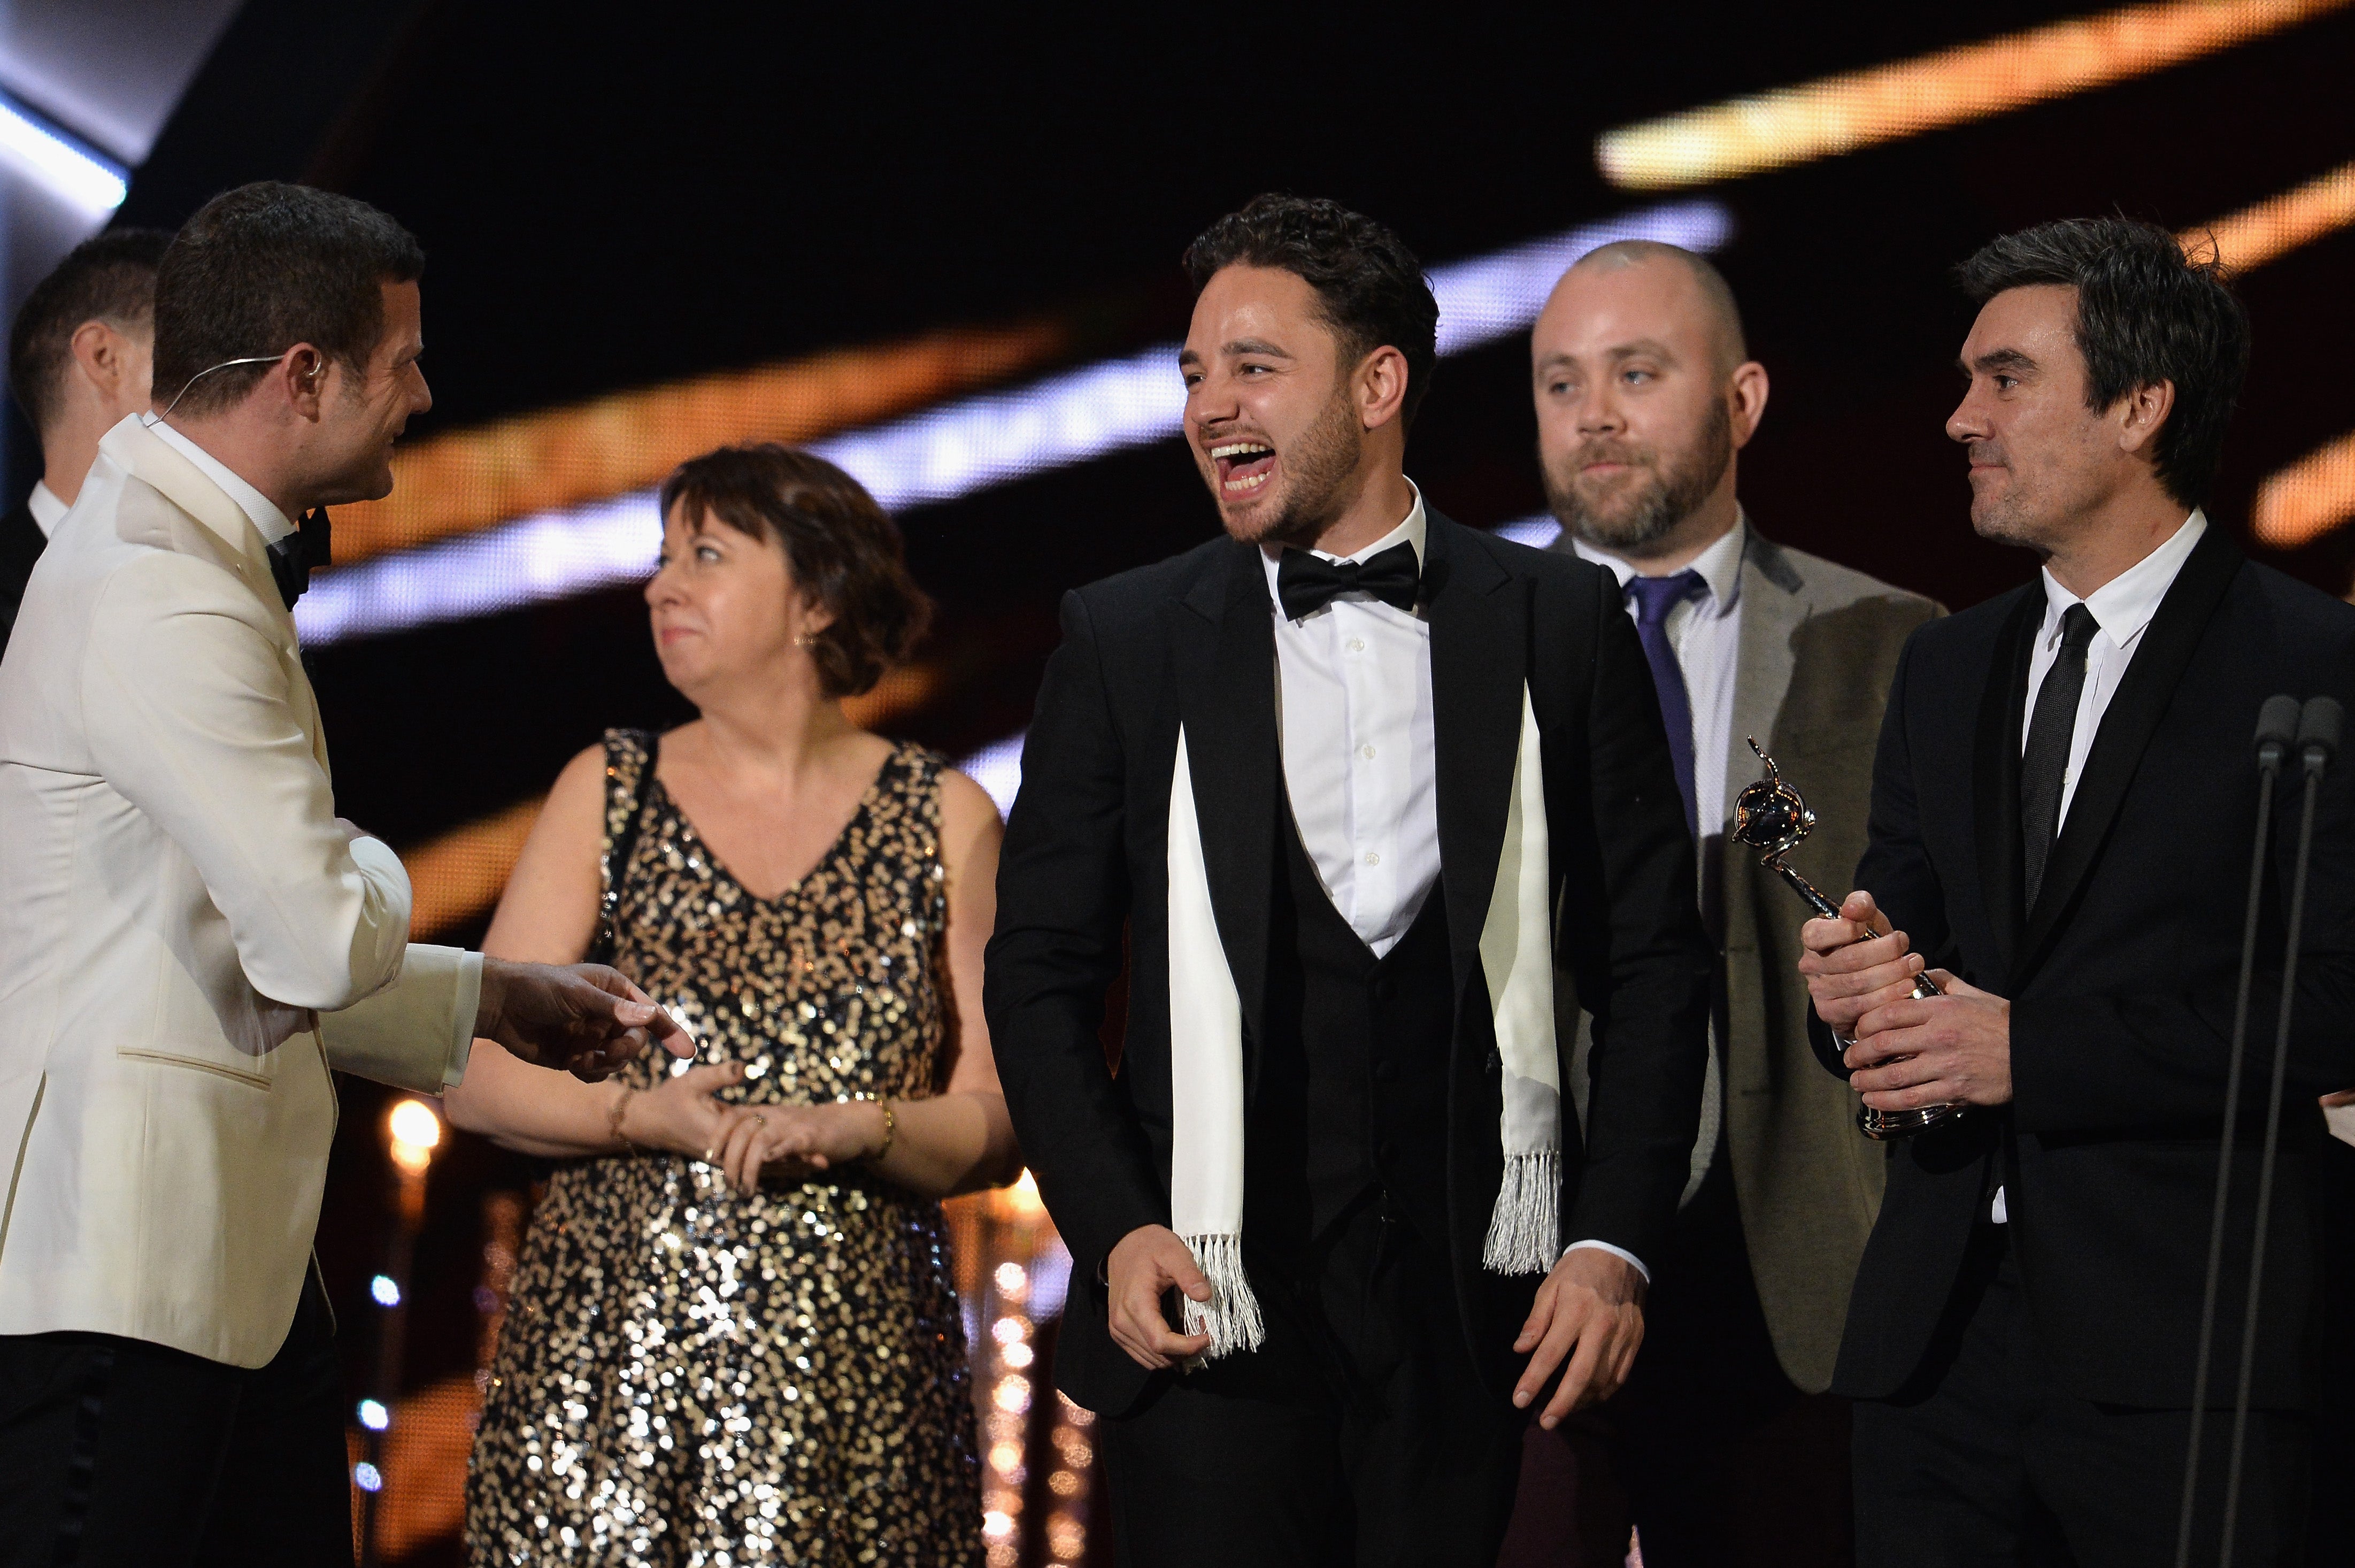 Adam Thomas and the cast of Emmerdale in 2017